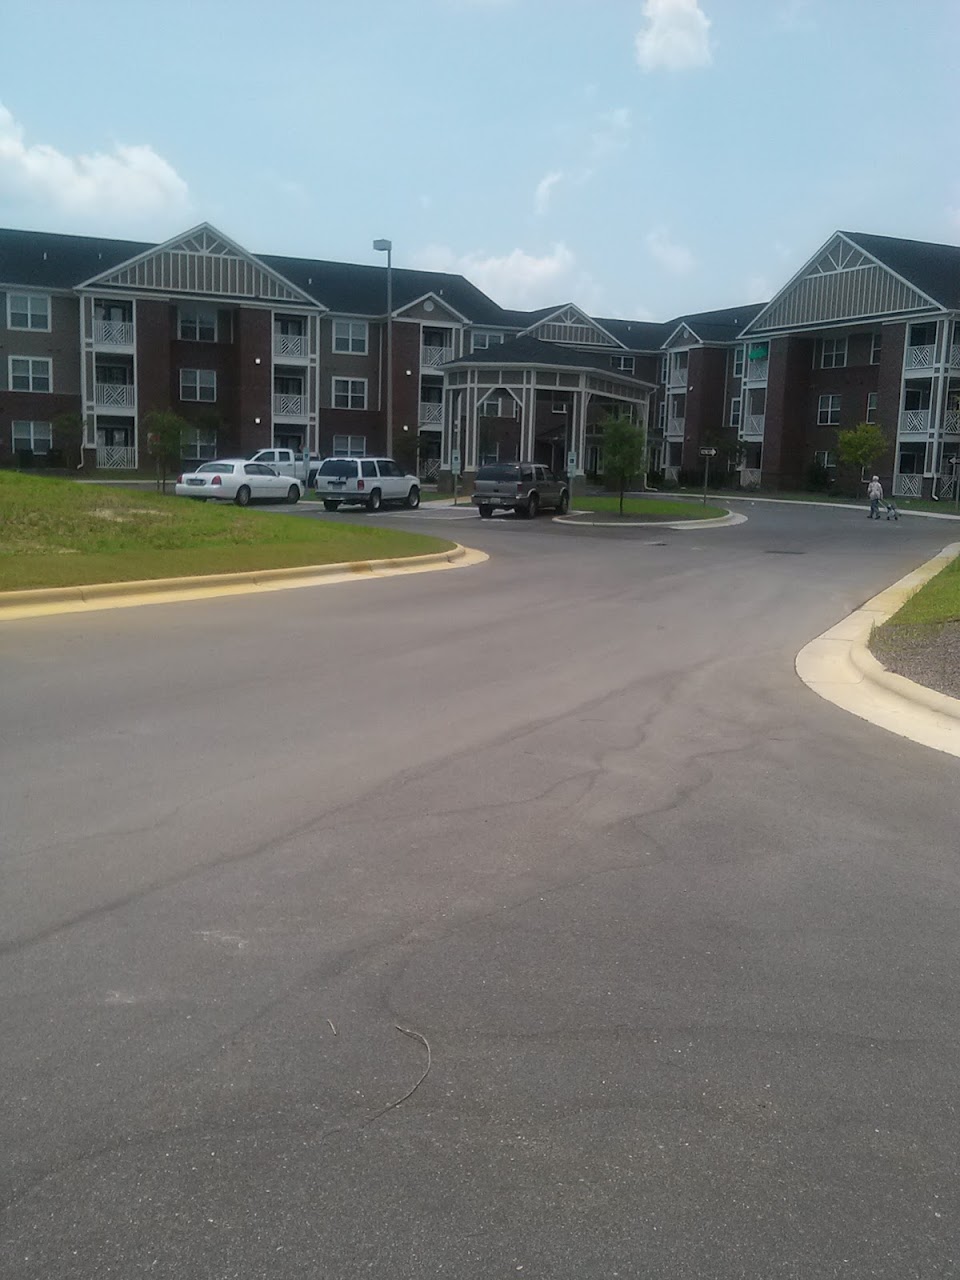 Photo of WESTGATE SENIOR APARTMENTS. Affordable housing located at 9200 OCEANGATE PLAZA EXTN LELAND, NC 28451